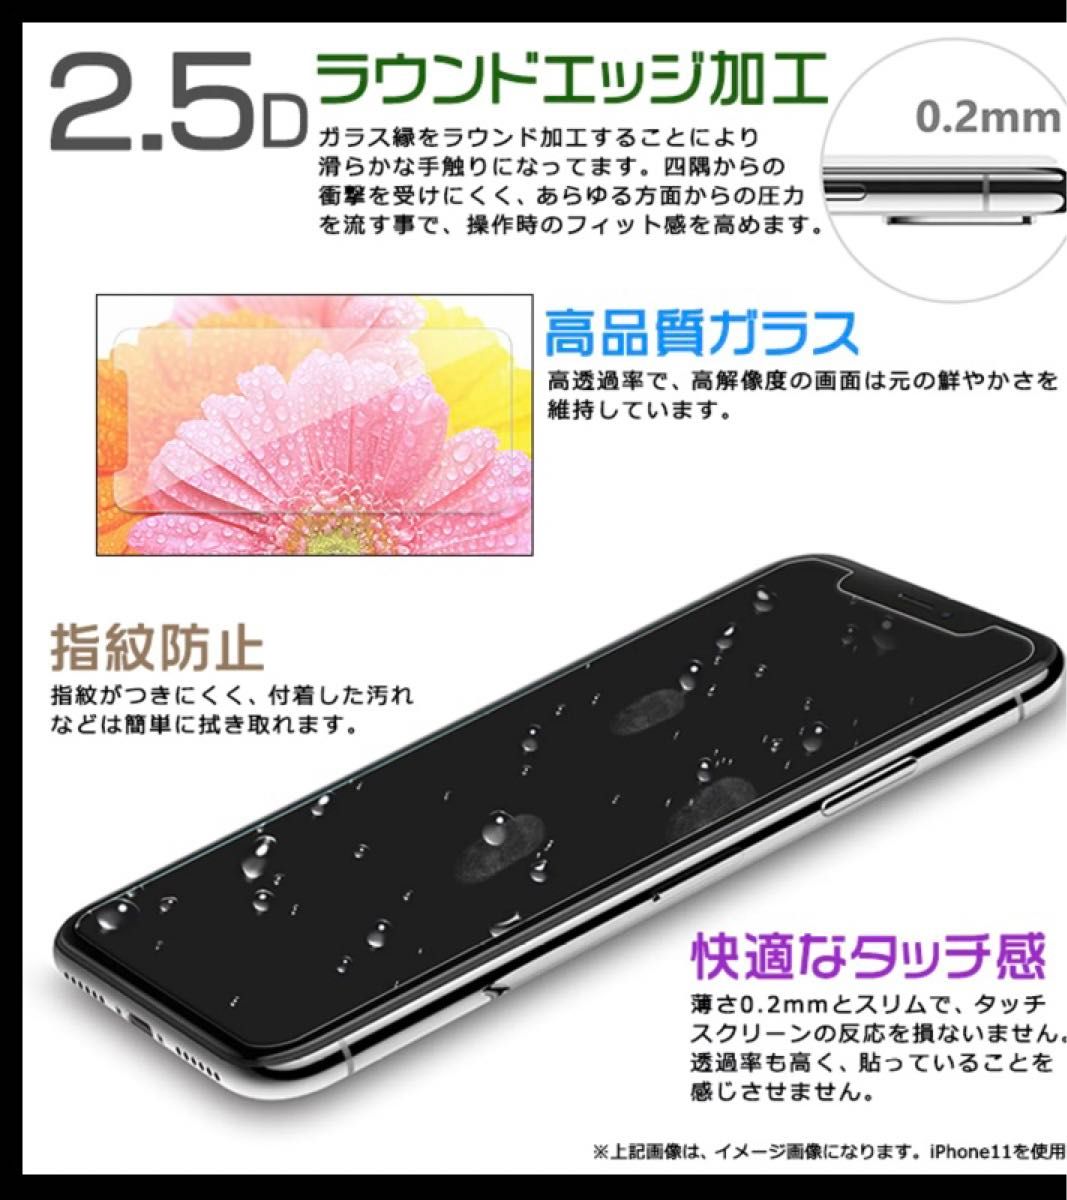 OPPO Reno7 A /9A スマホ　ガラス保護フィルム